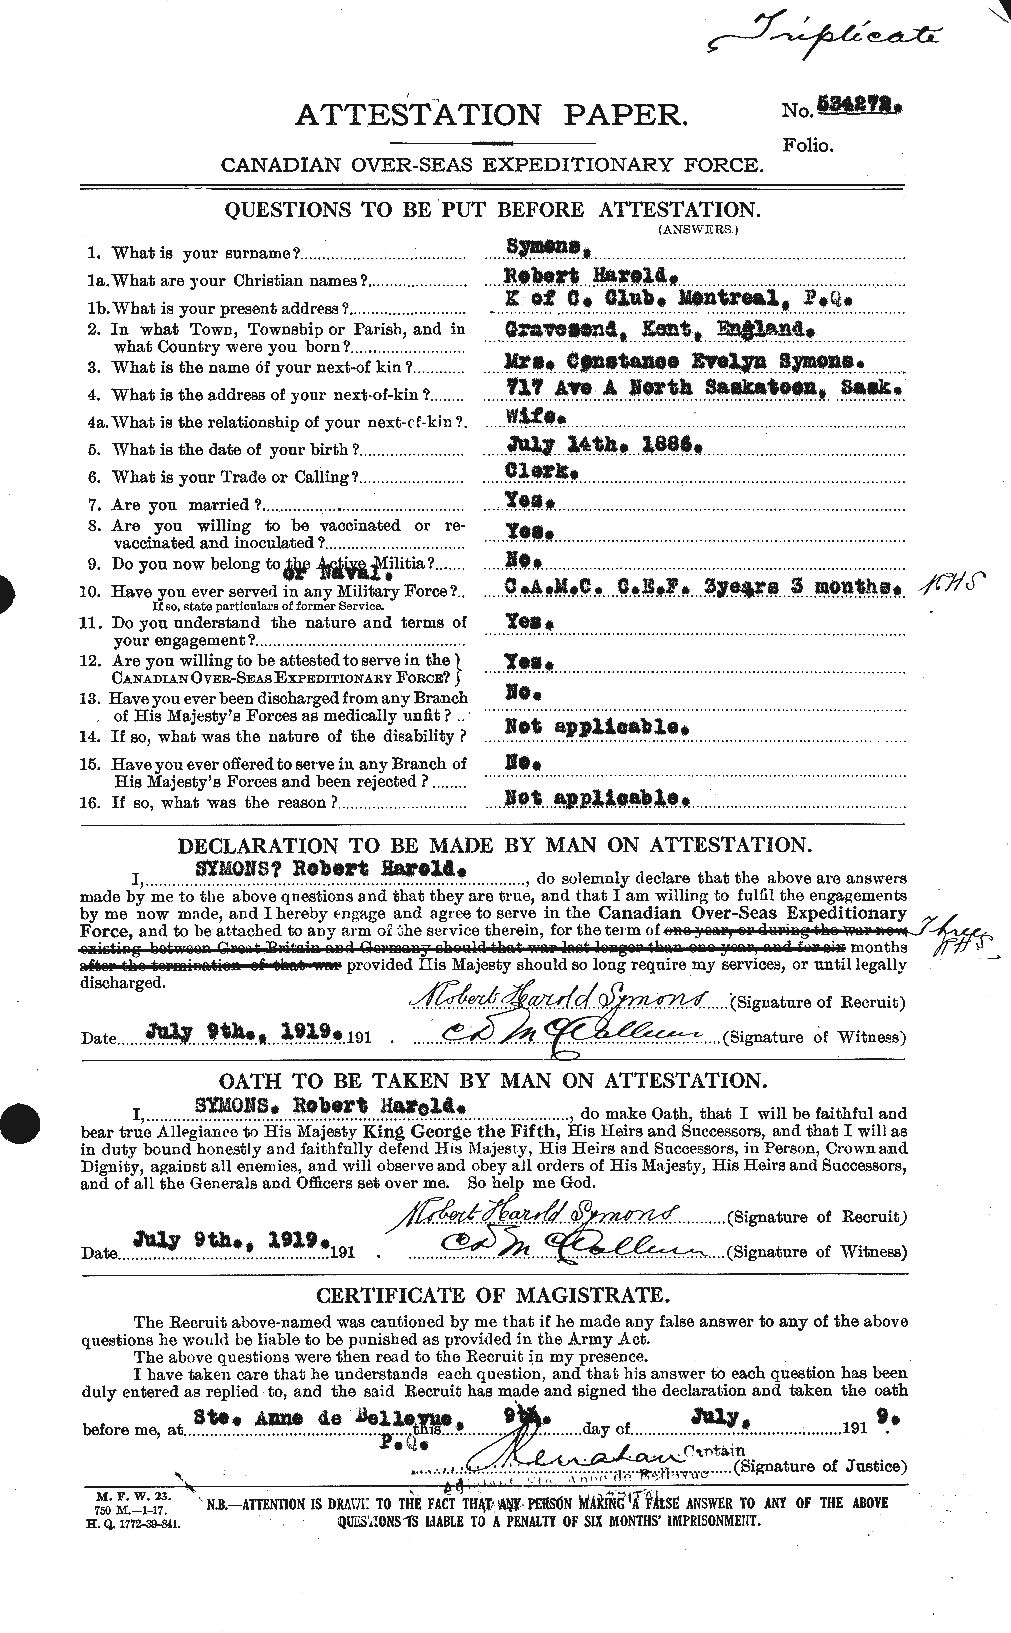 Personnel Records of the First World War - CEF 129027a